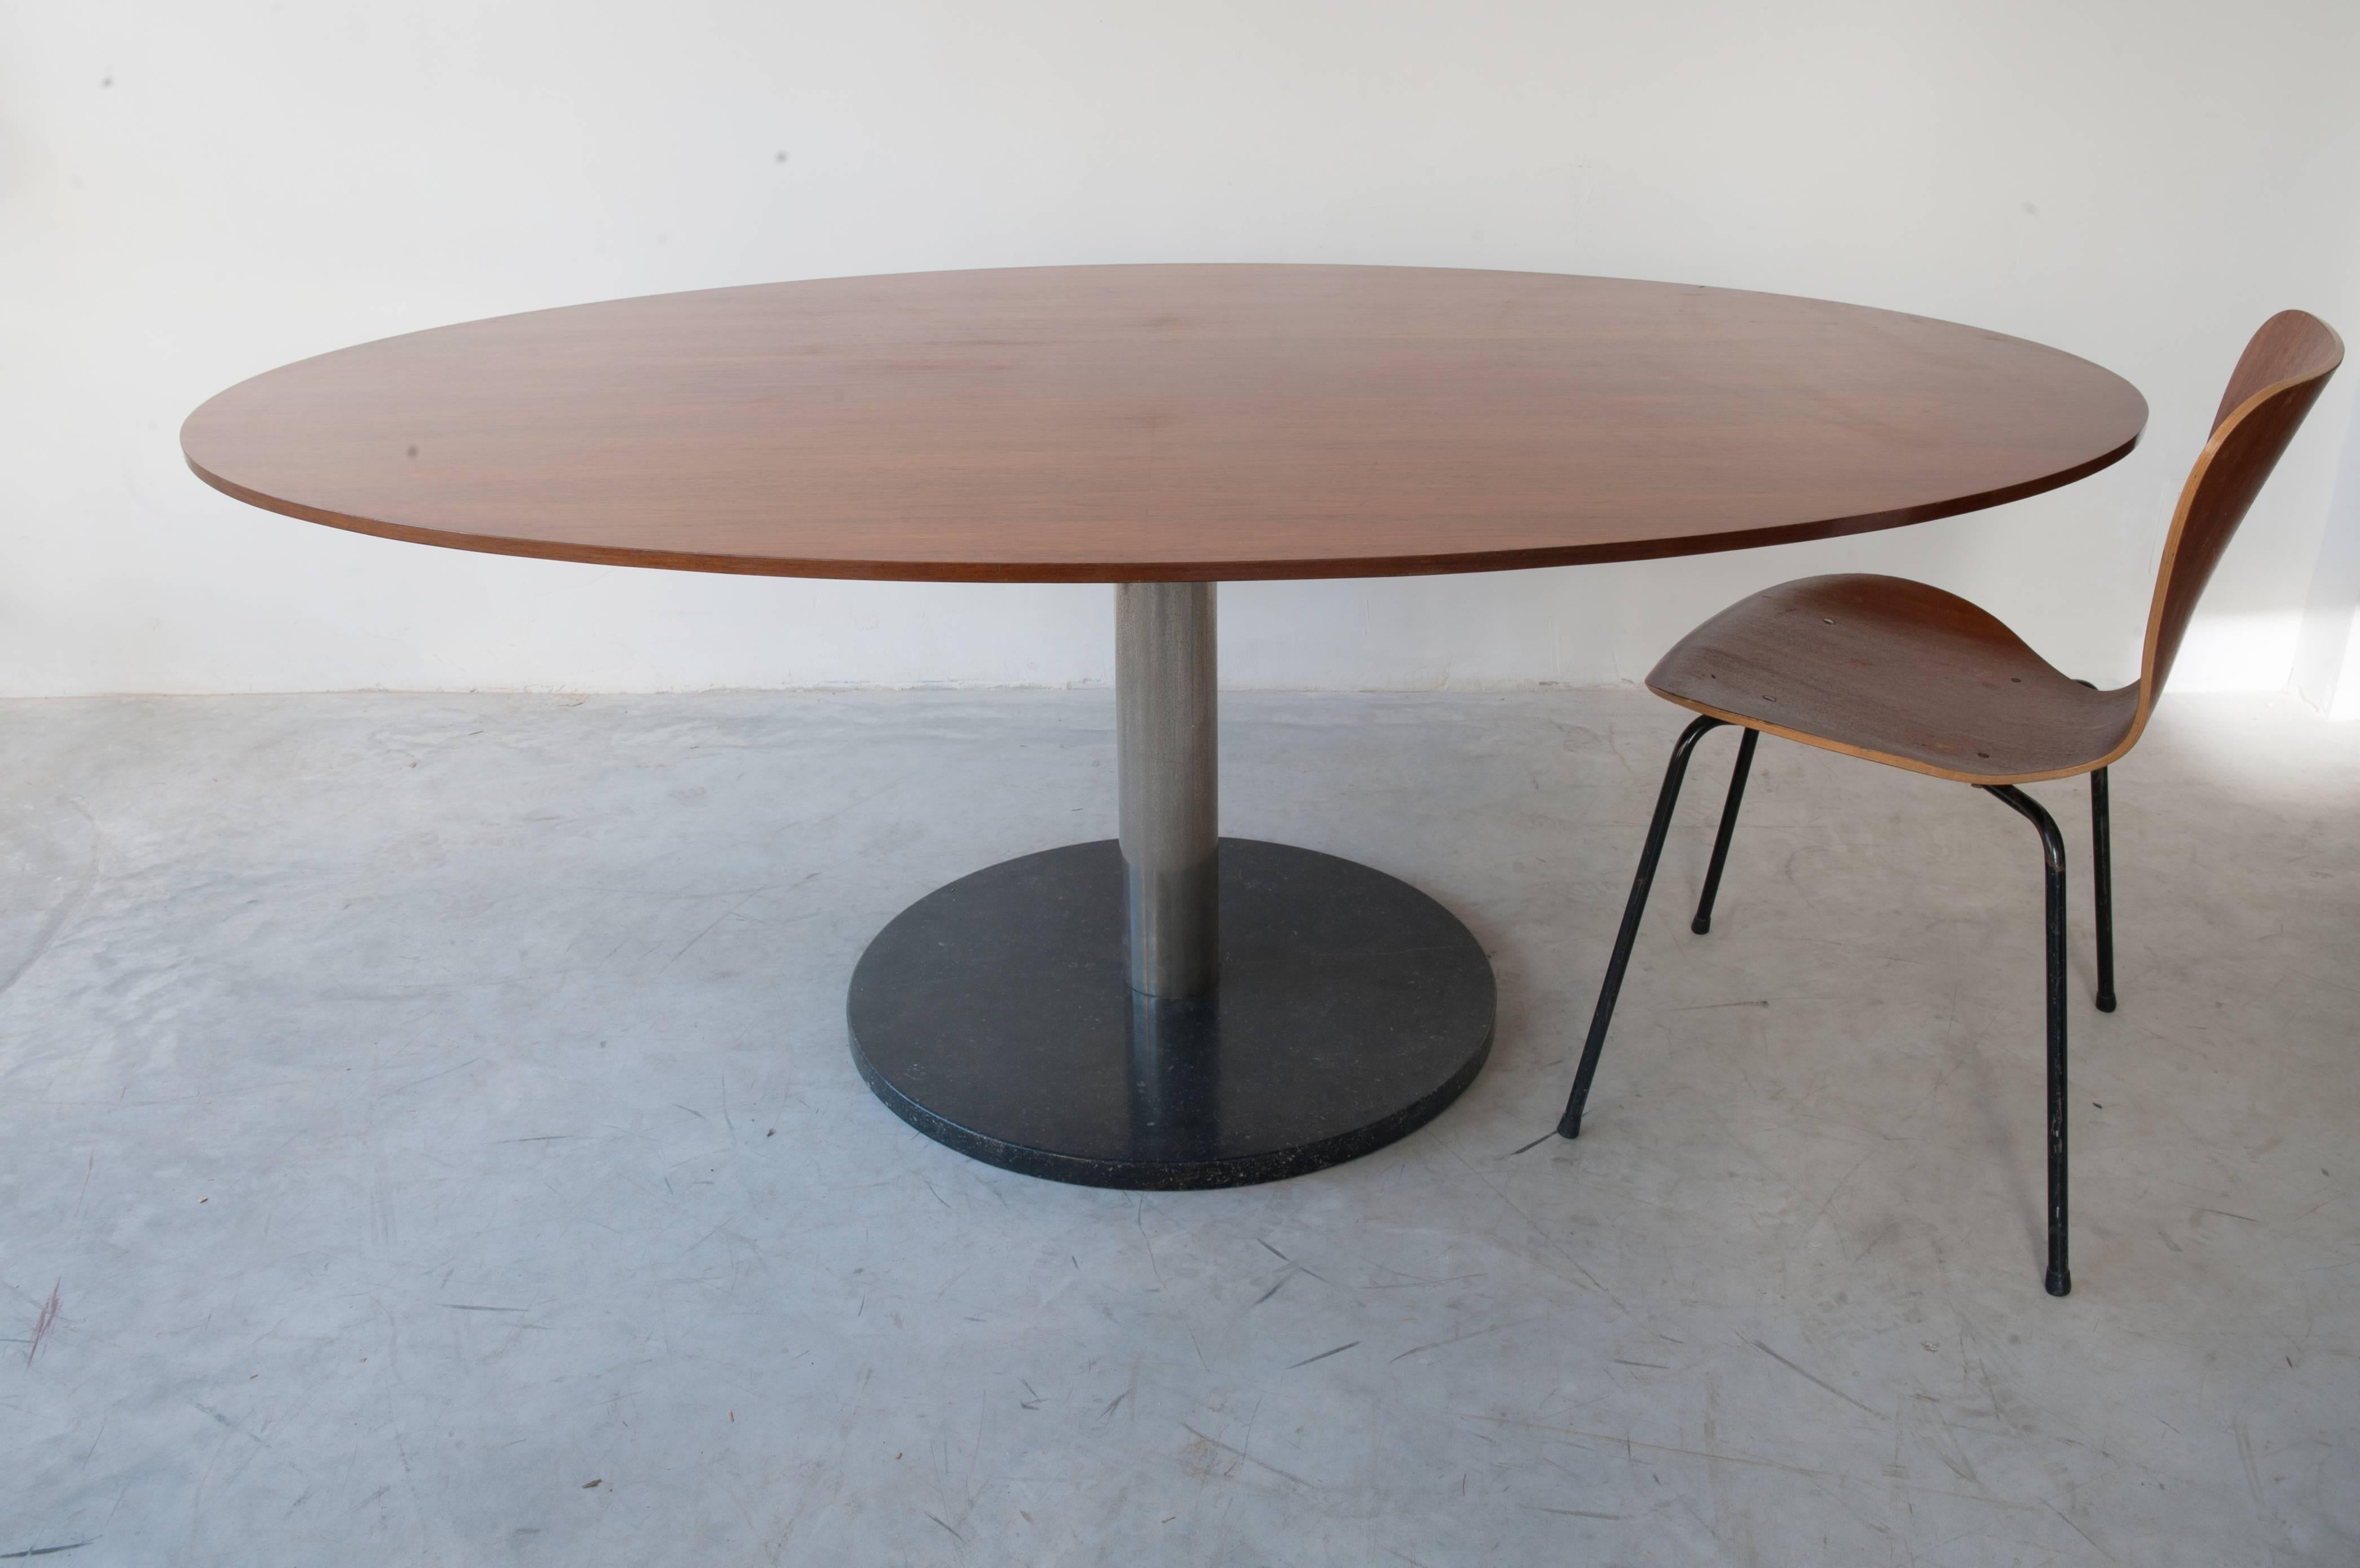 Mid-Century Modern Alfred Hendrickx Oval Shaped Walnut Dining Table, Belgium Design, 1962 For Sale